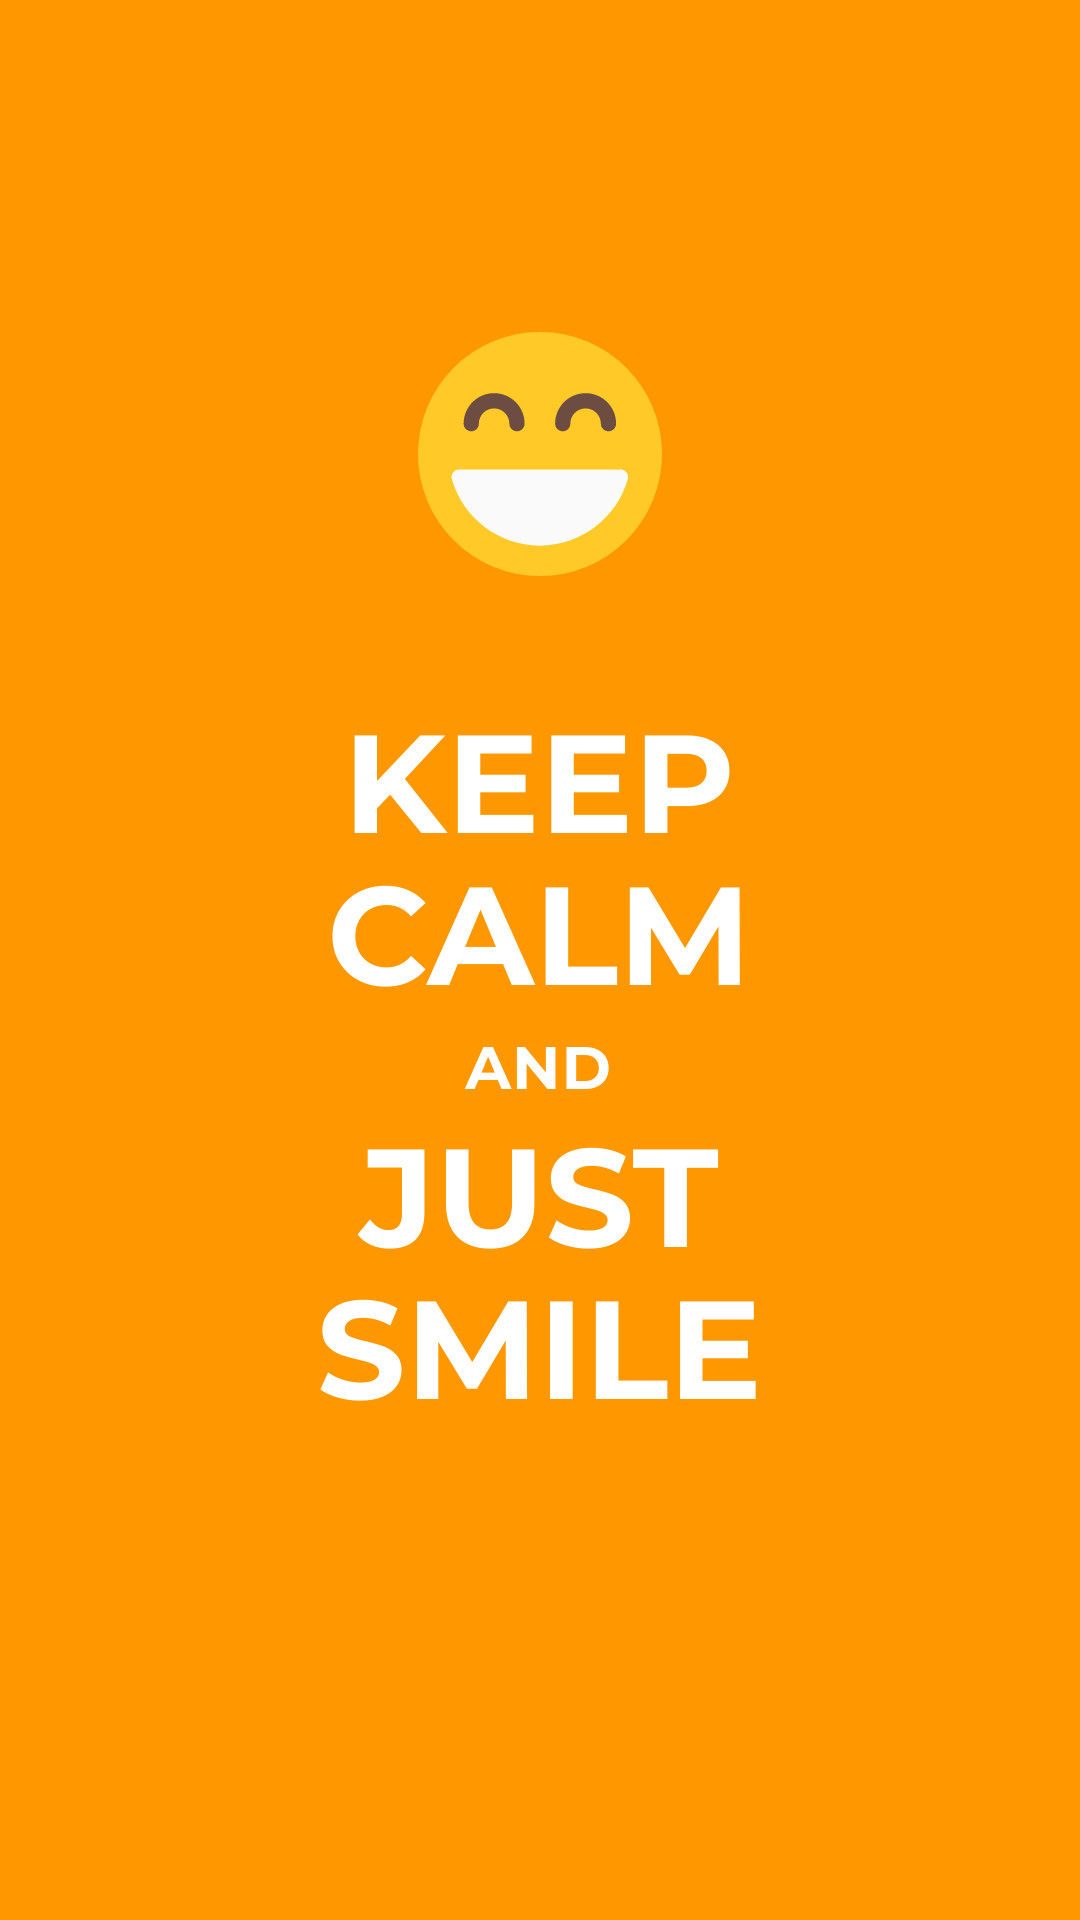 Keep Calm and Just Smile Facebook Sponsored Message 1200x628